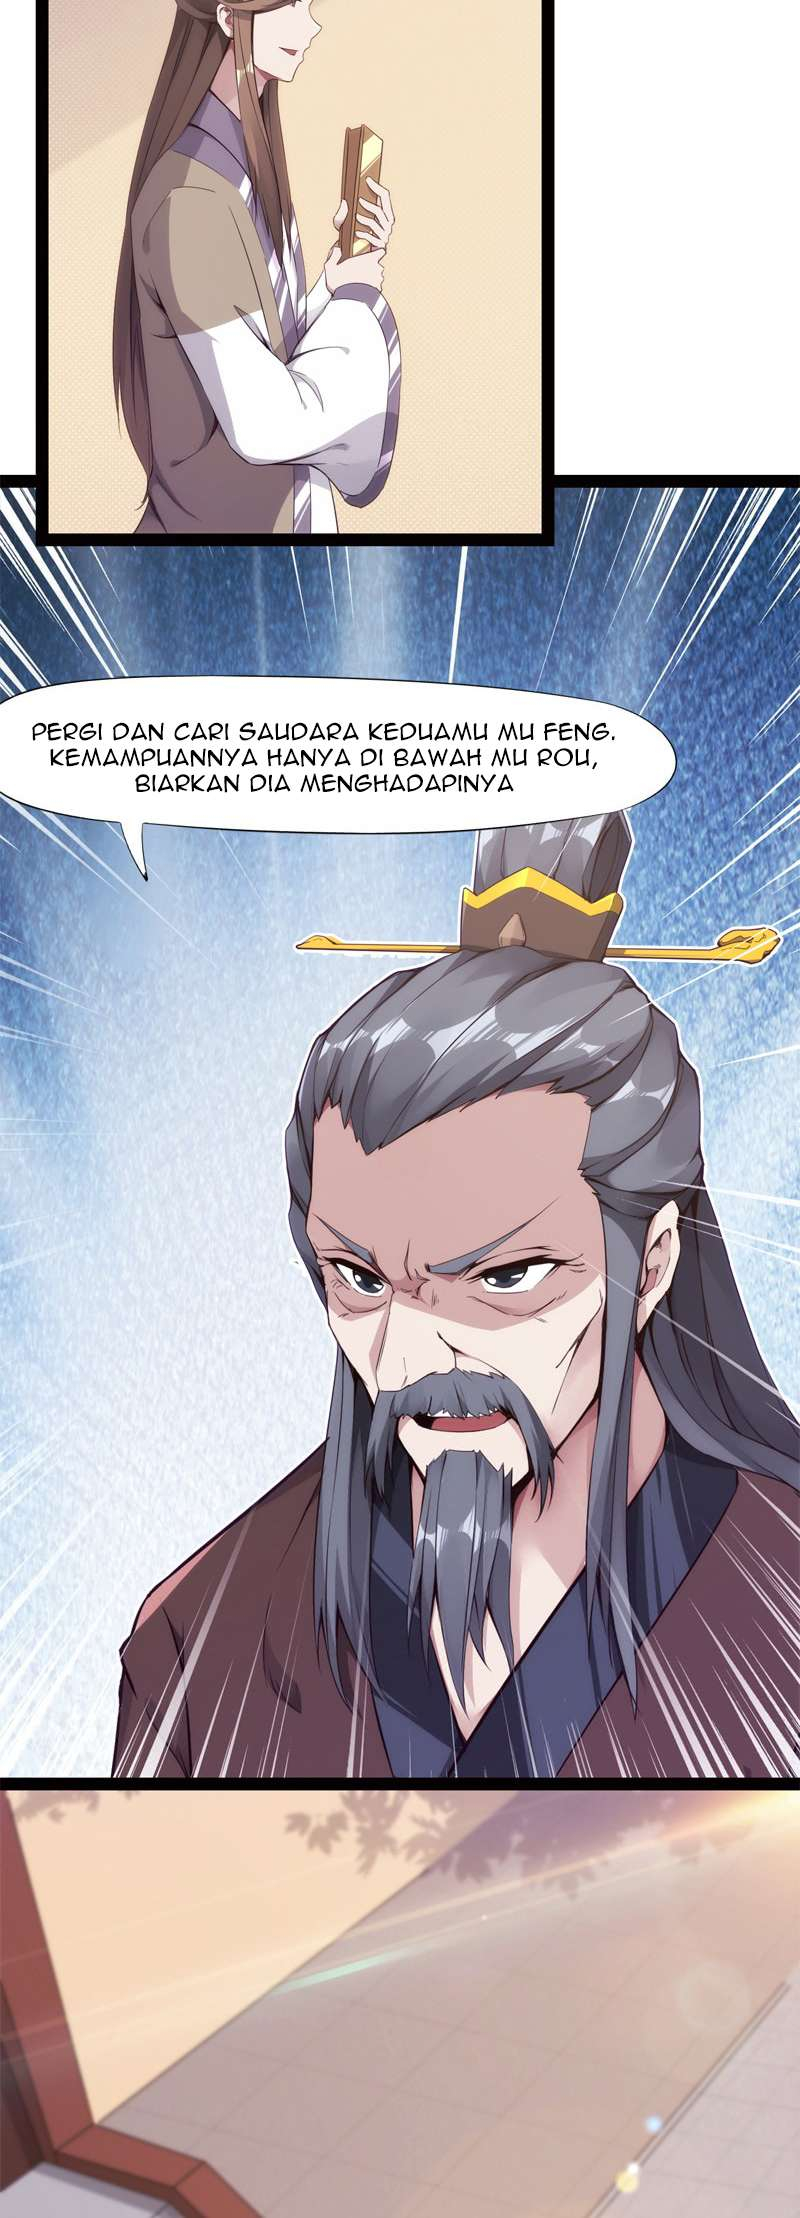 Path of the Sword Chapter 5